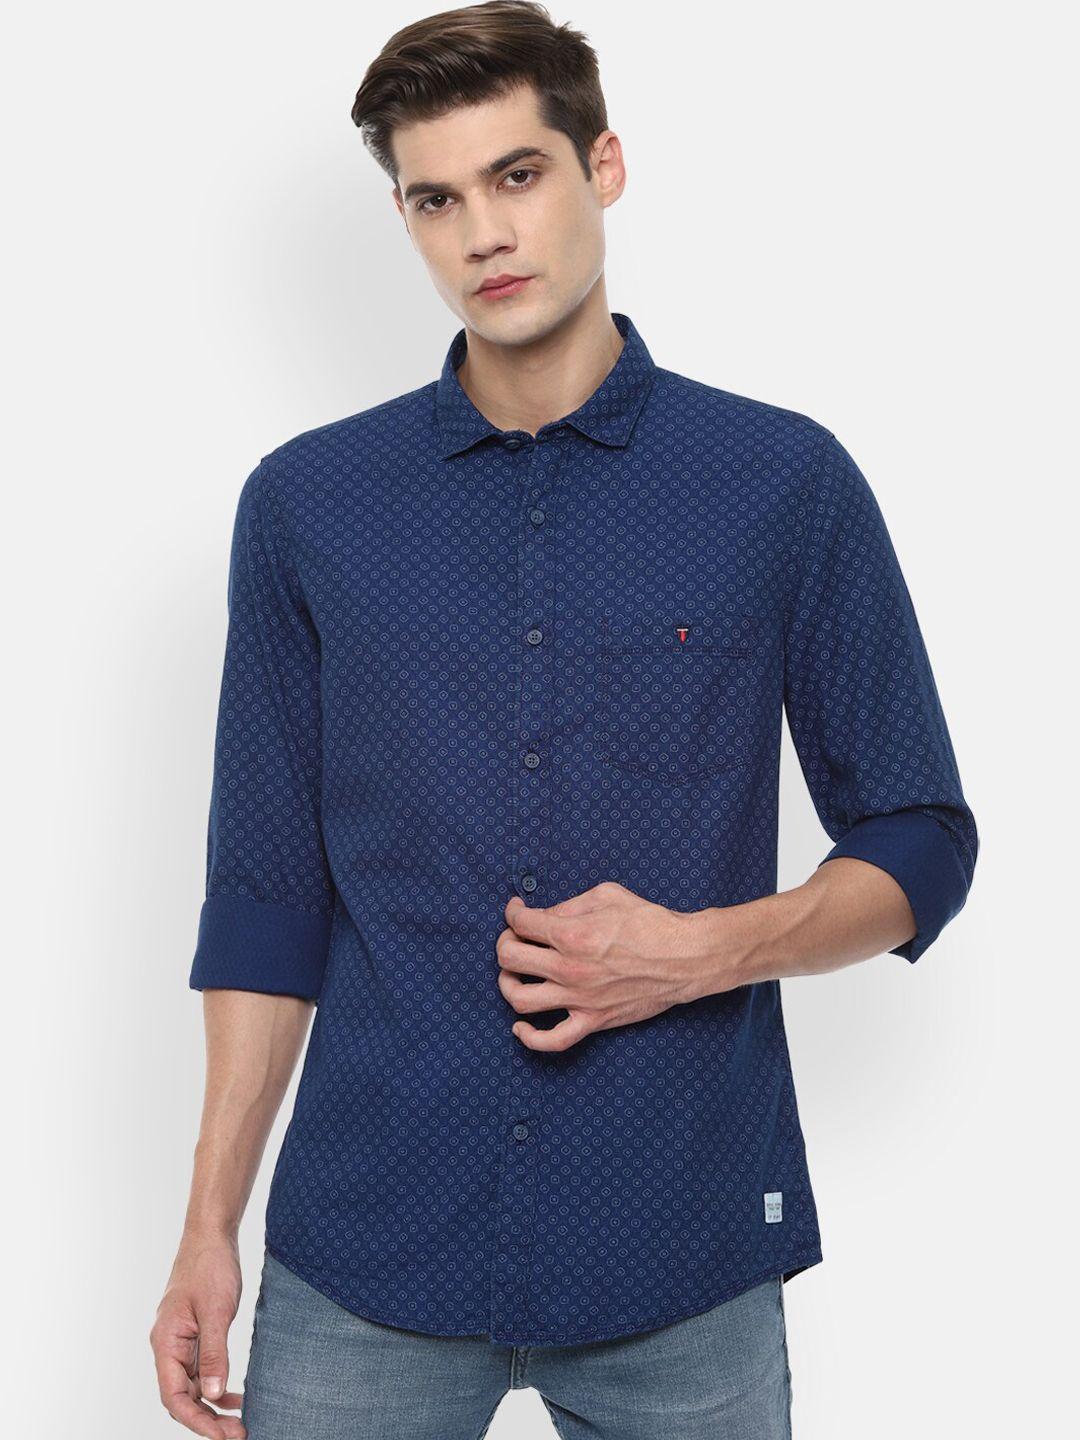 louis-philippe-jeans-men-navy-blue-slim-fit-opaque-printed-casual-shirt